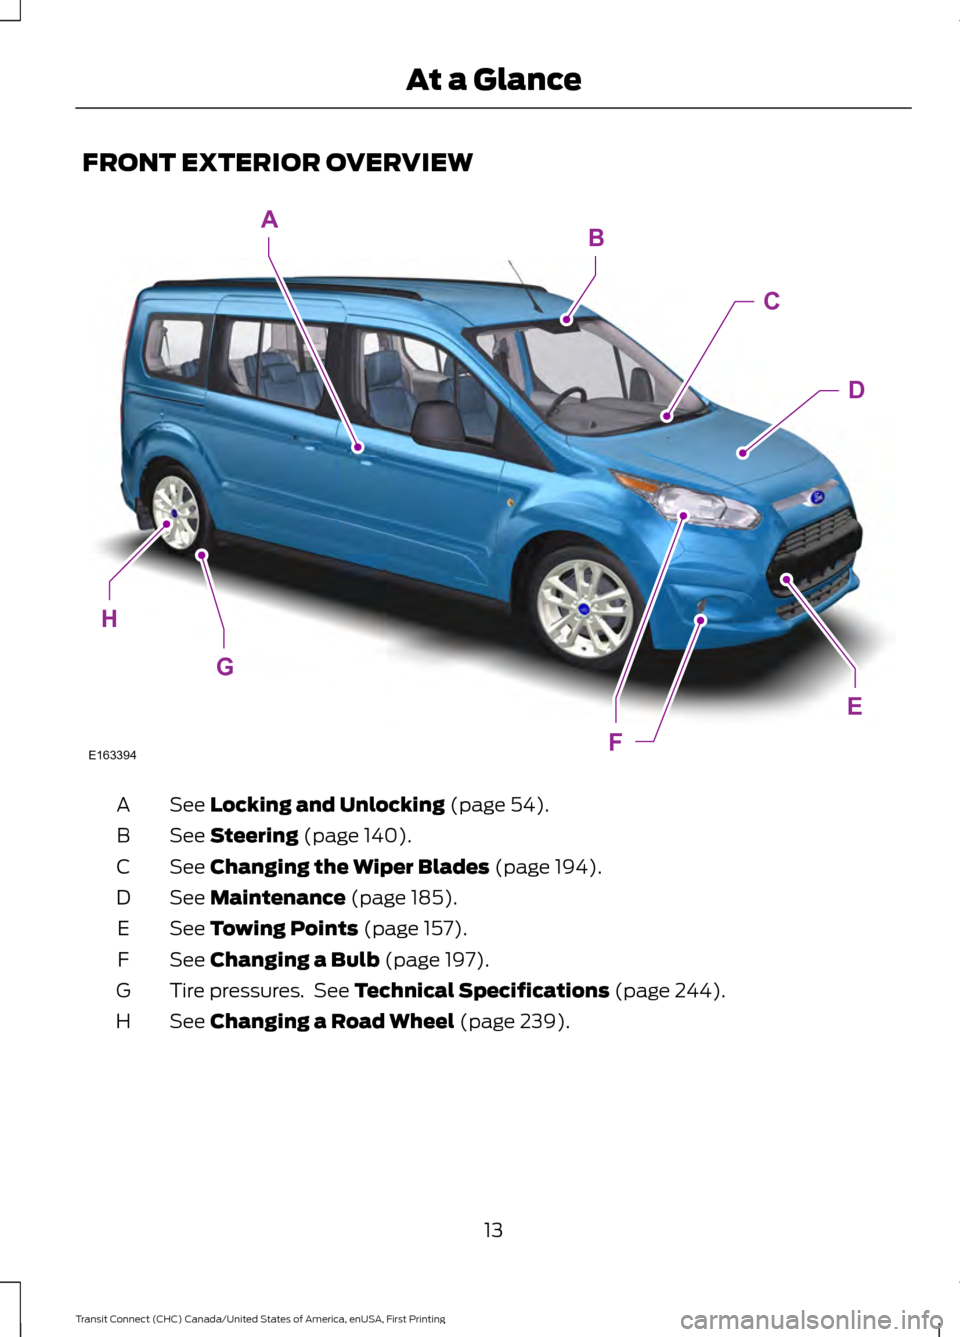 FORD TRANSIT CONNECT 2015 2.G User Guide FRONT EXTERIOR OVERVIEW
See Locking and Unlocking (page 54).
A
See 
Steering (page 140).
B
See 
Changing the Wiper Blades (page 194).
C
See 
Maintenance (page 185).
D
See 
Towing Points (page 157).
E
